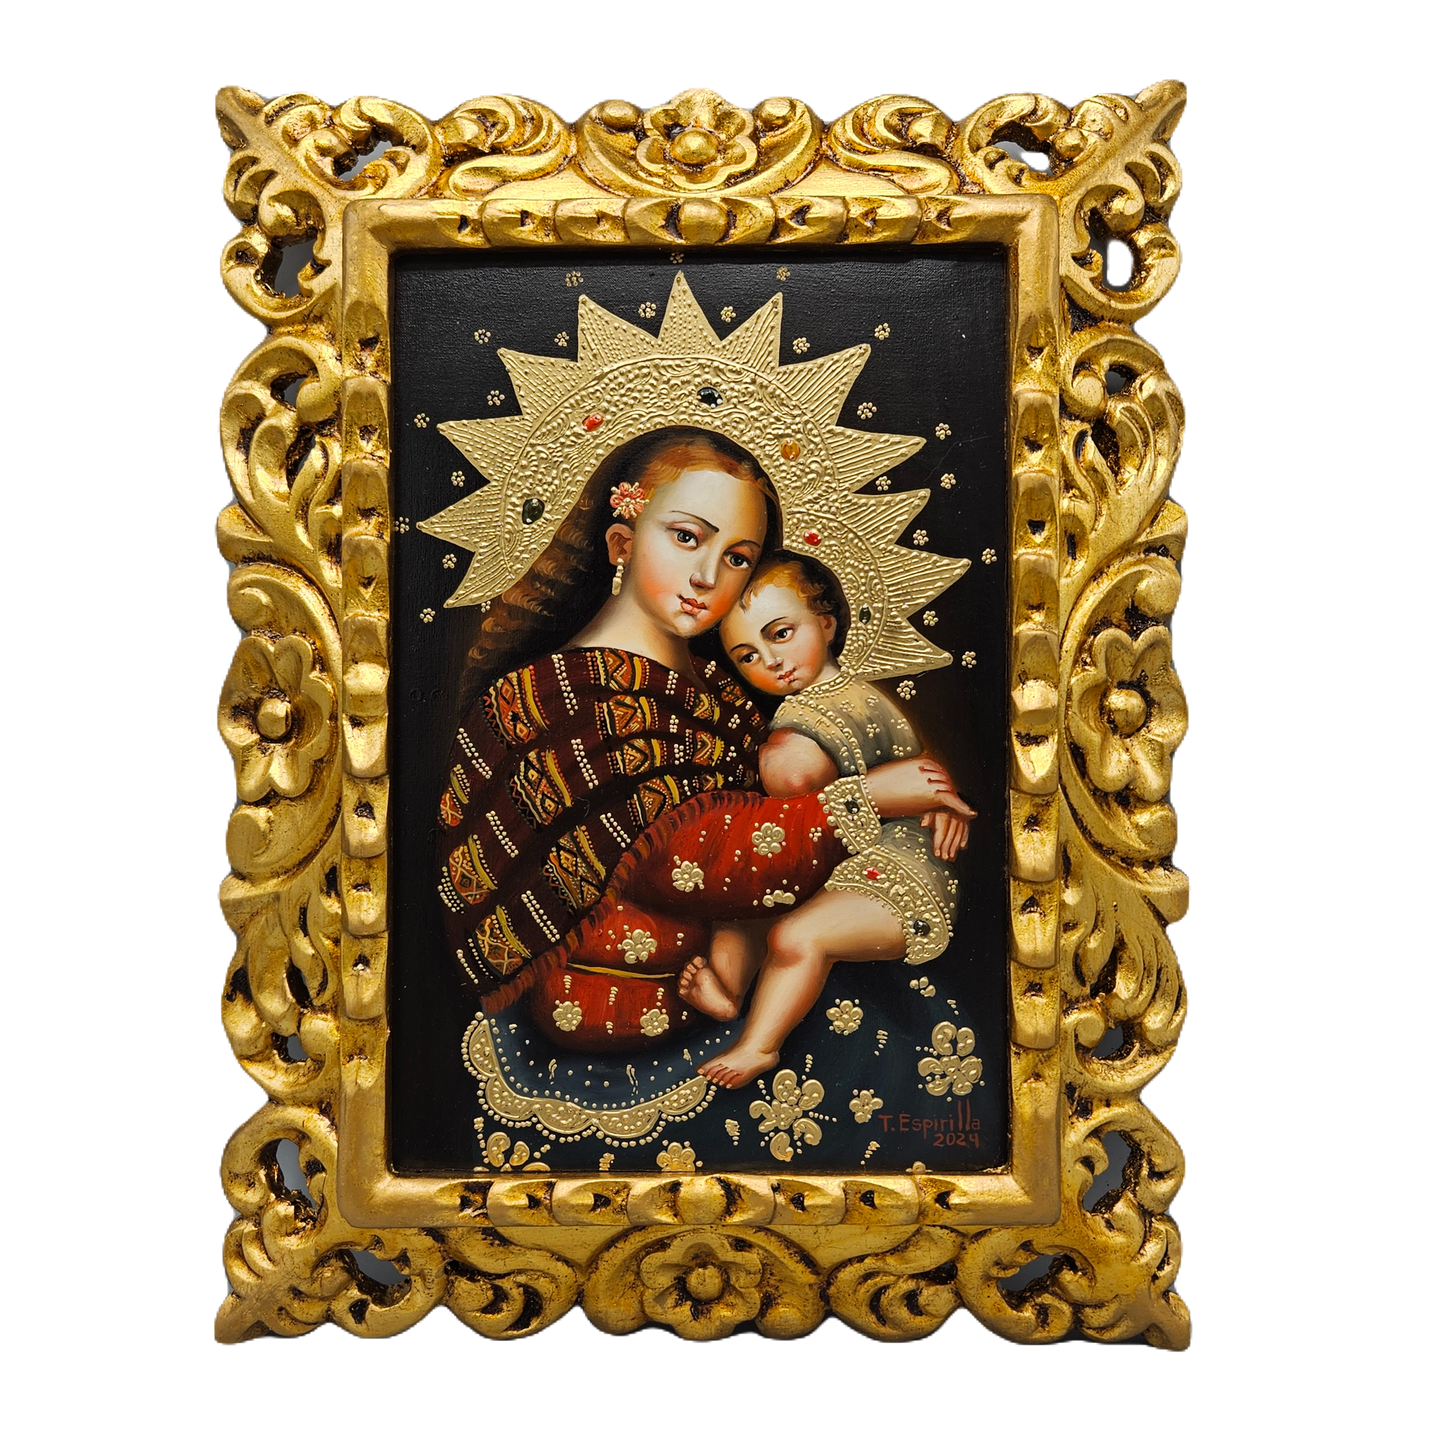 Handcarved Gilt Wood Framed Painting on Canvas of Madonna & Child Religious Icon